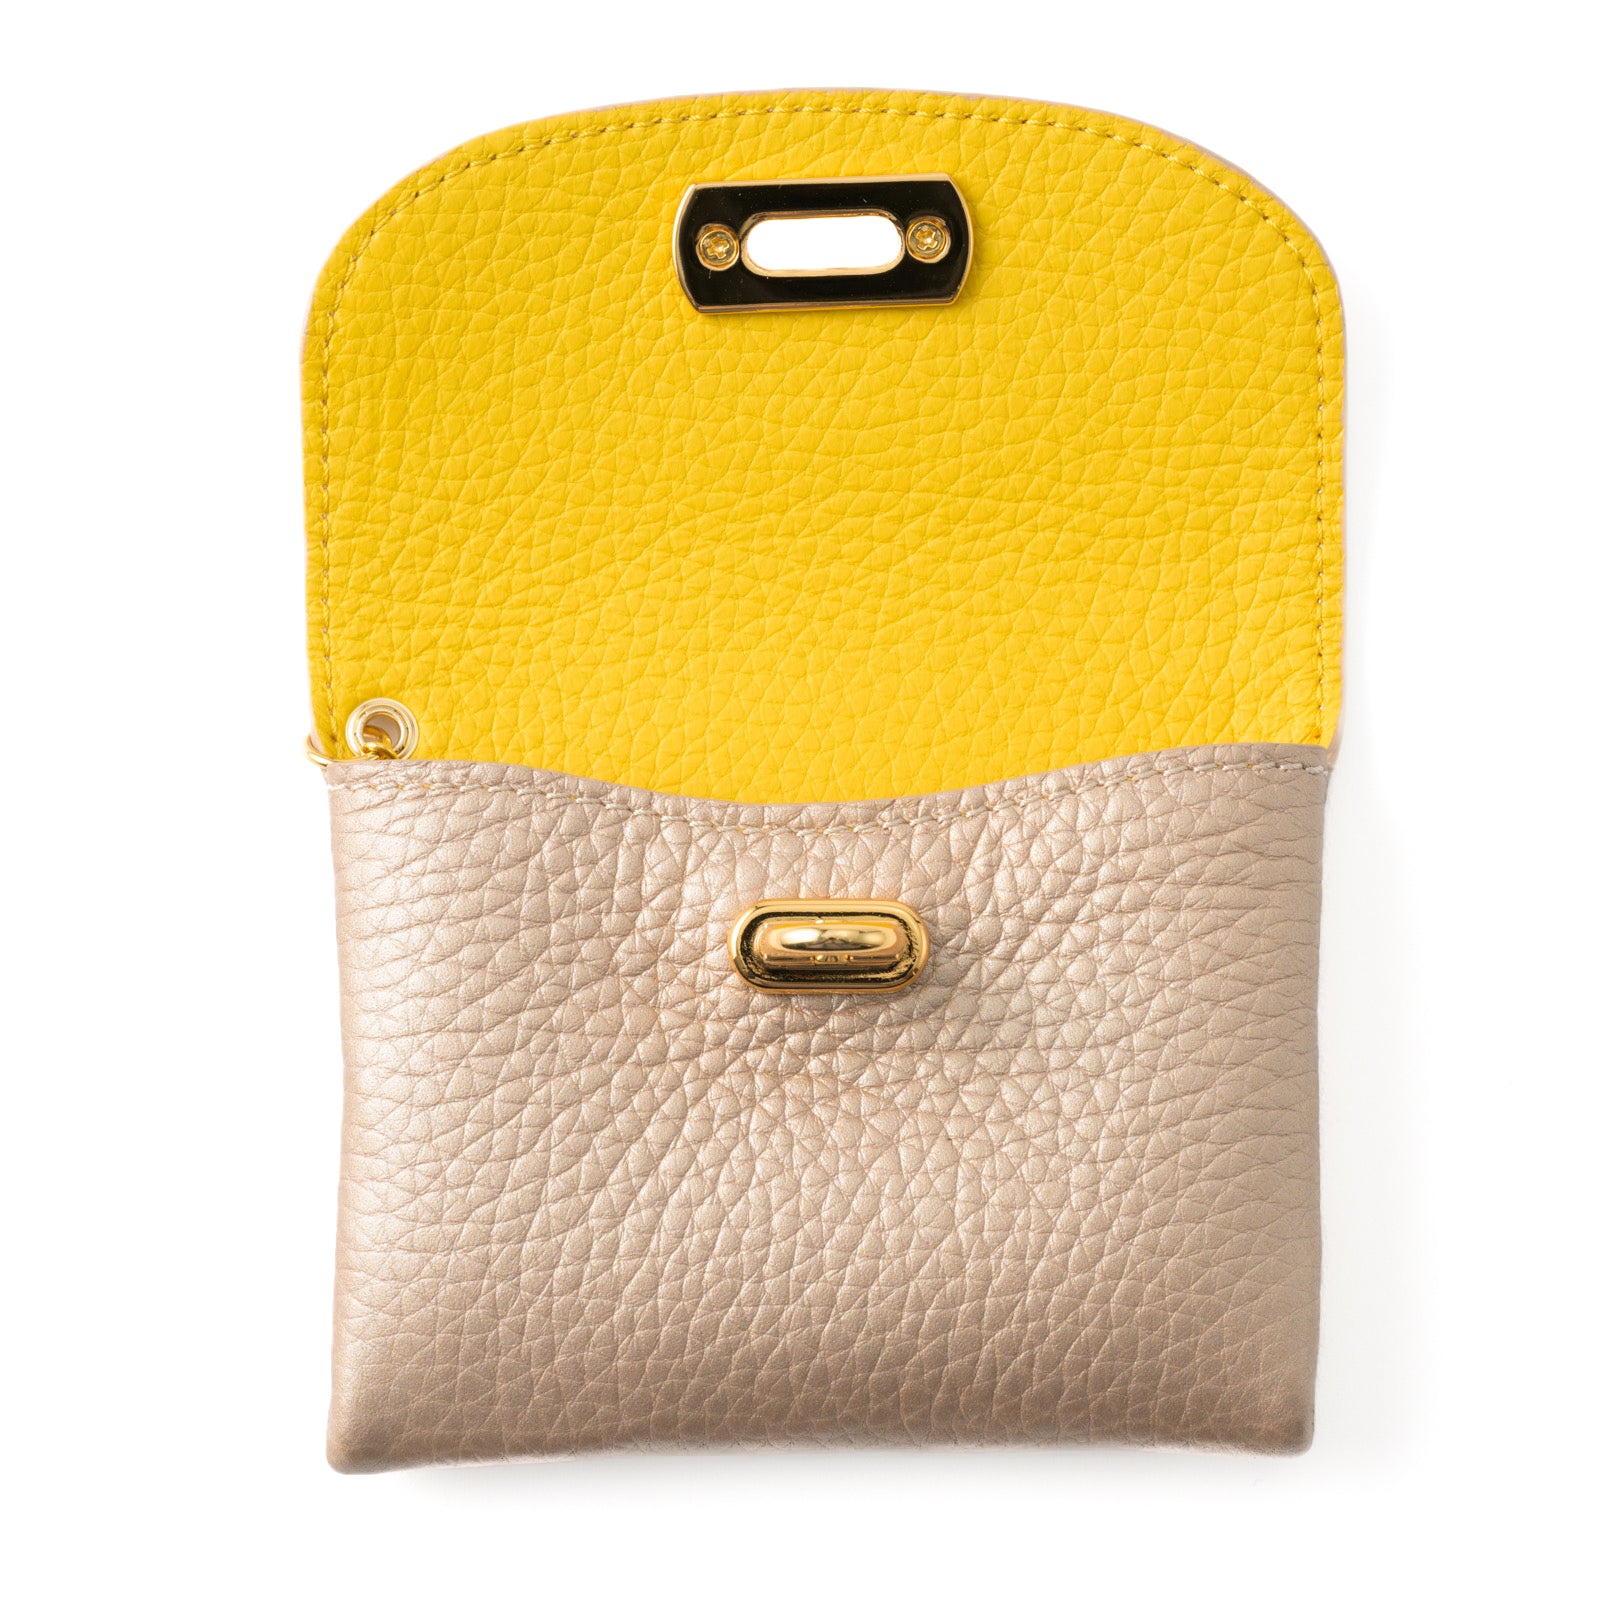 Leather flap smart key case / Taurillon Clemence